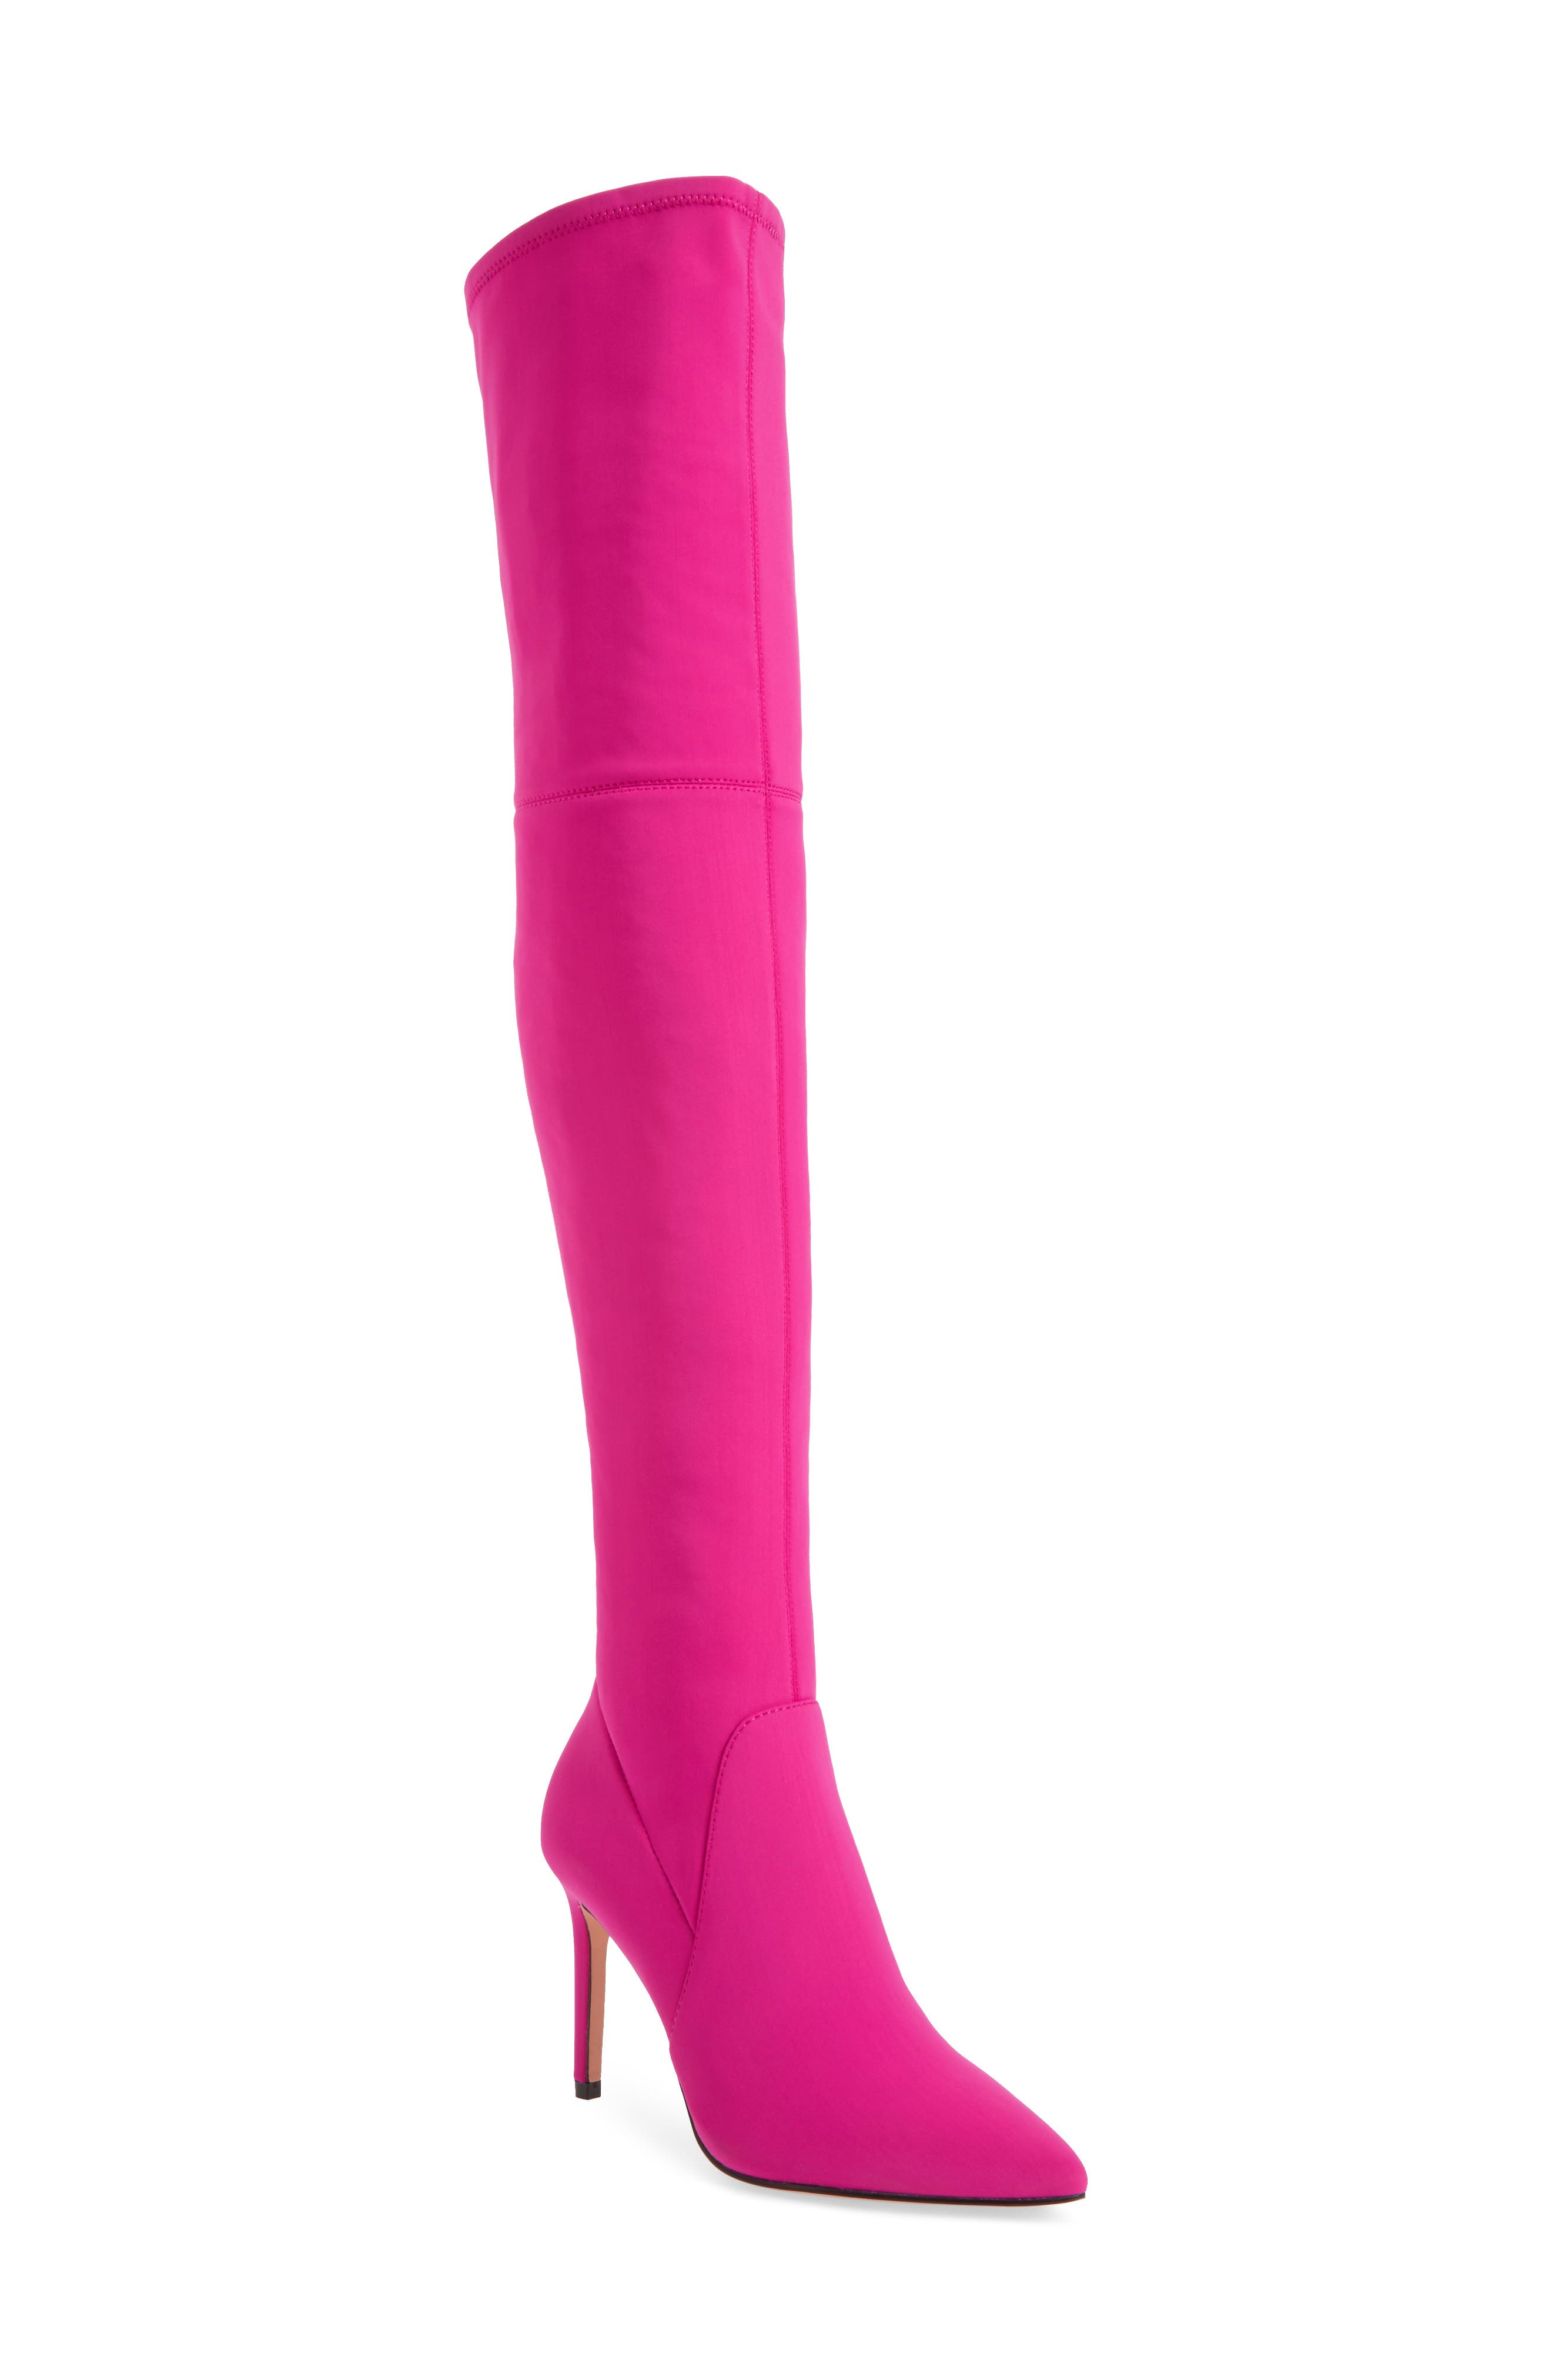 pink over the knee boots